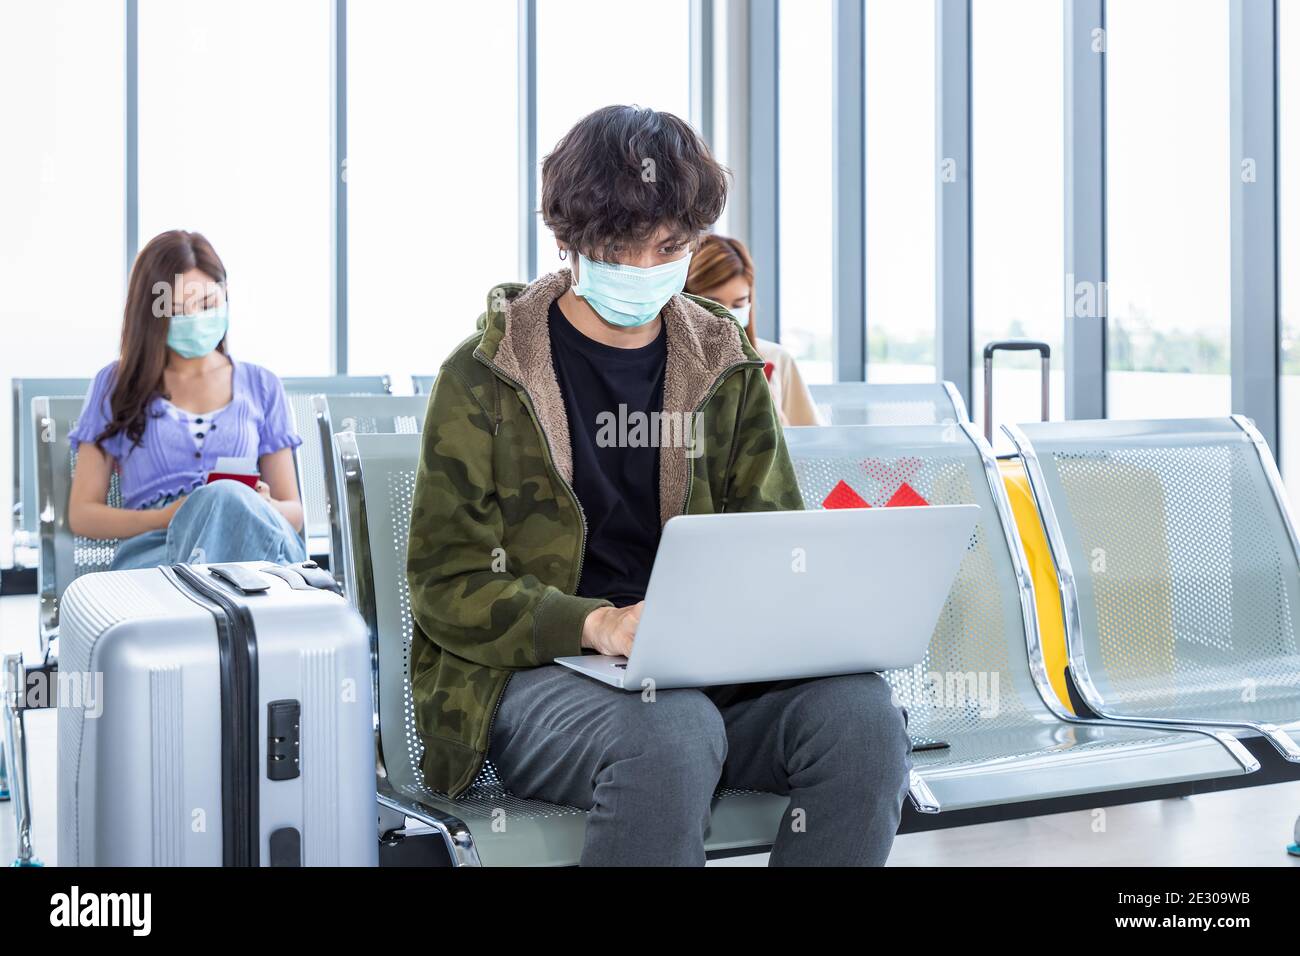 Traveler wearing protective mask in airport, during Covid-19 pandemic, with social distancing protocol. Using laptop computer while waiting for flight Stock Photo